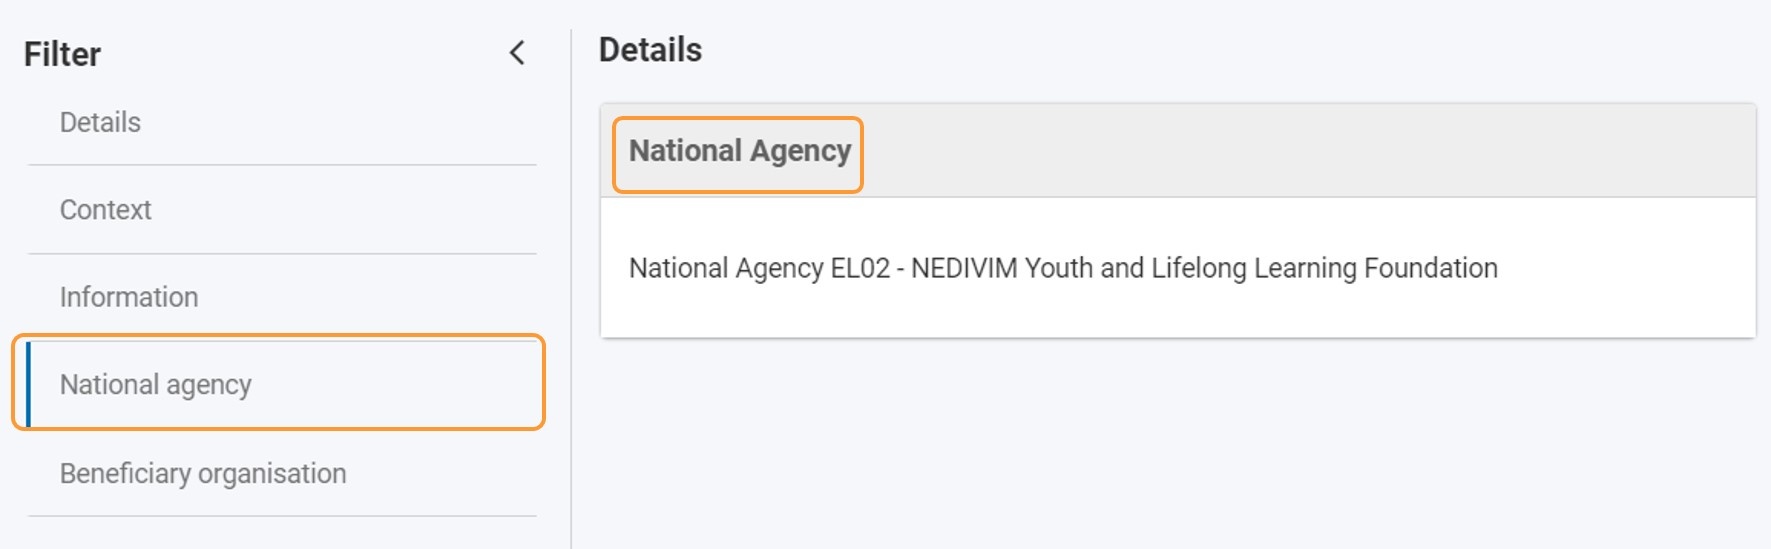 National Agency section